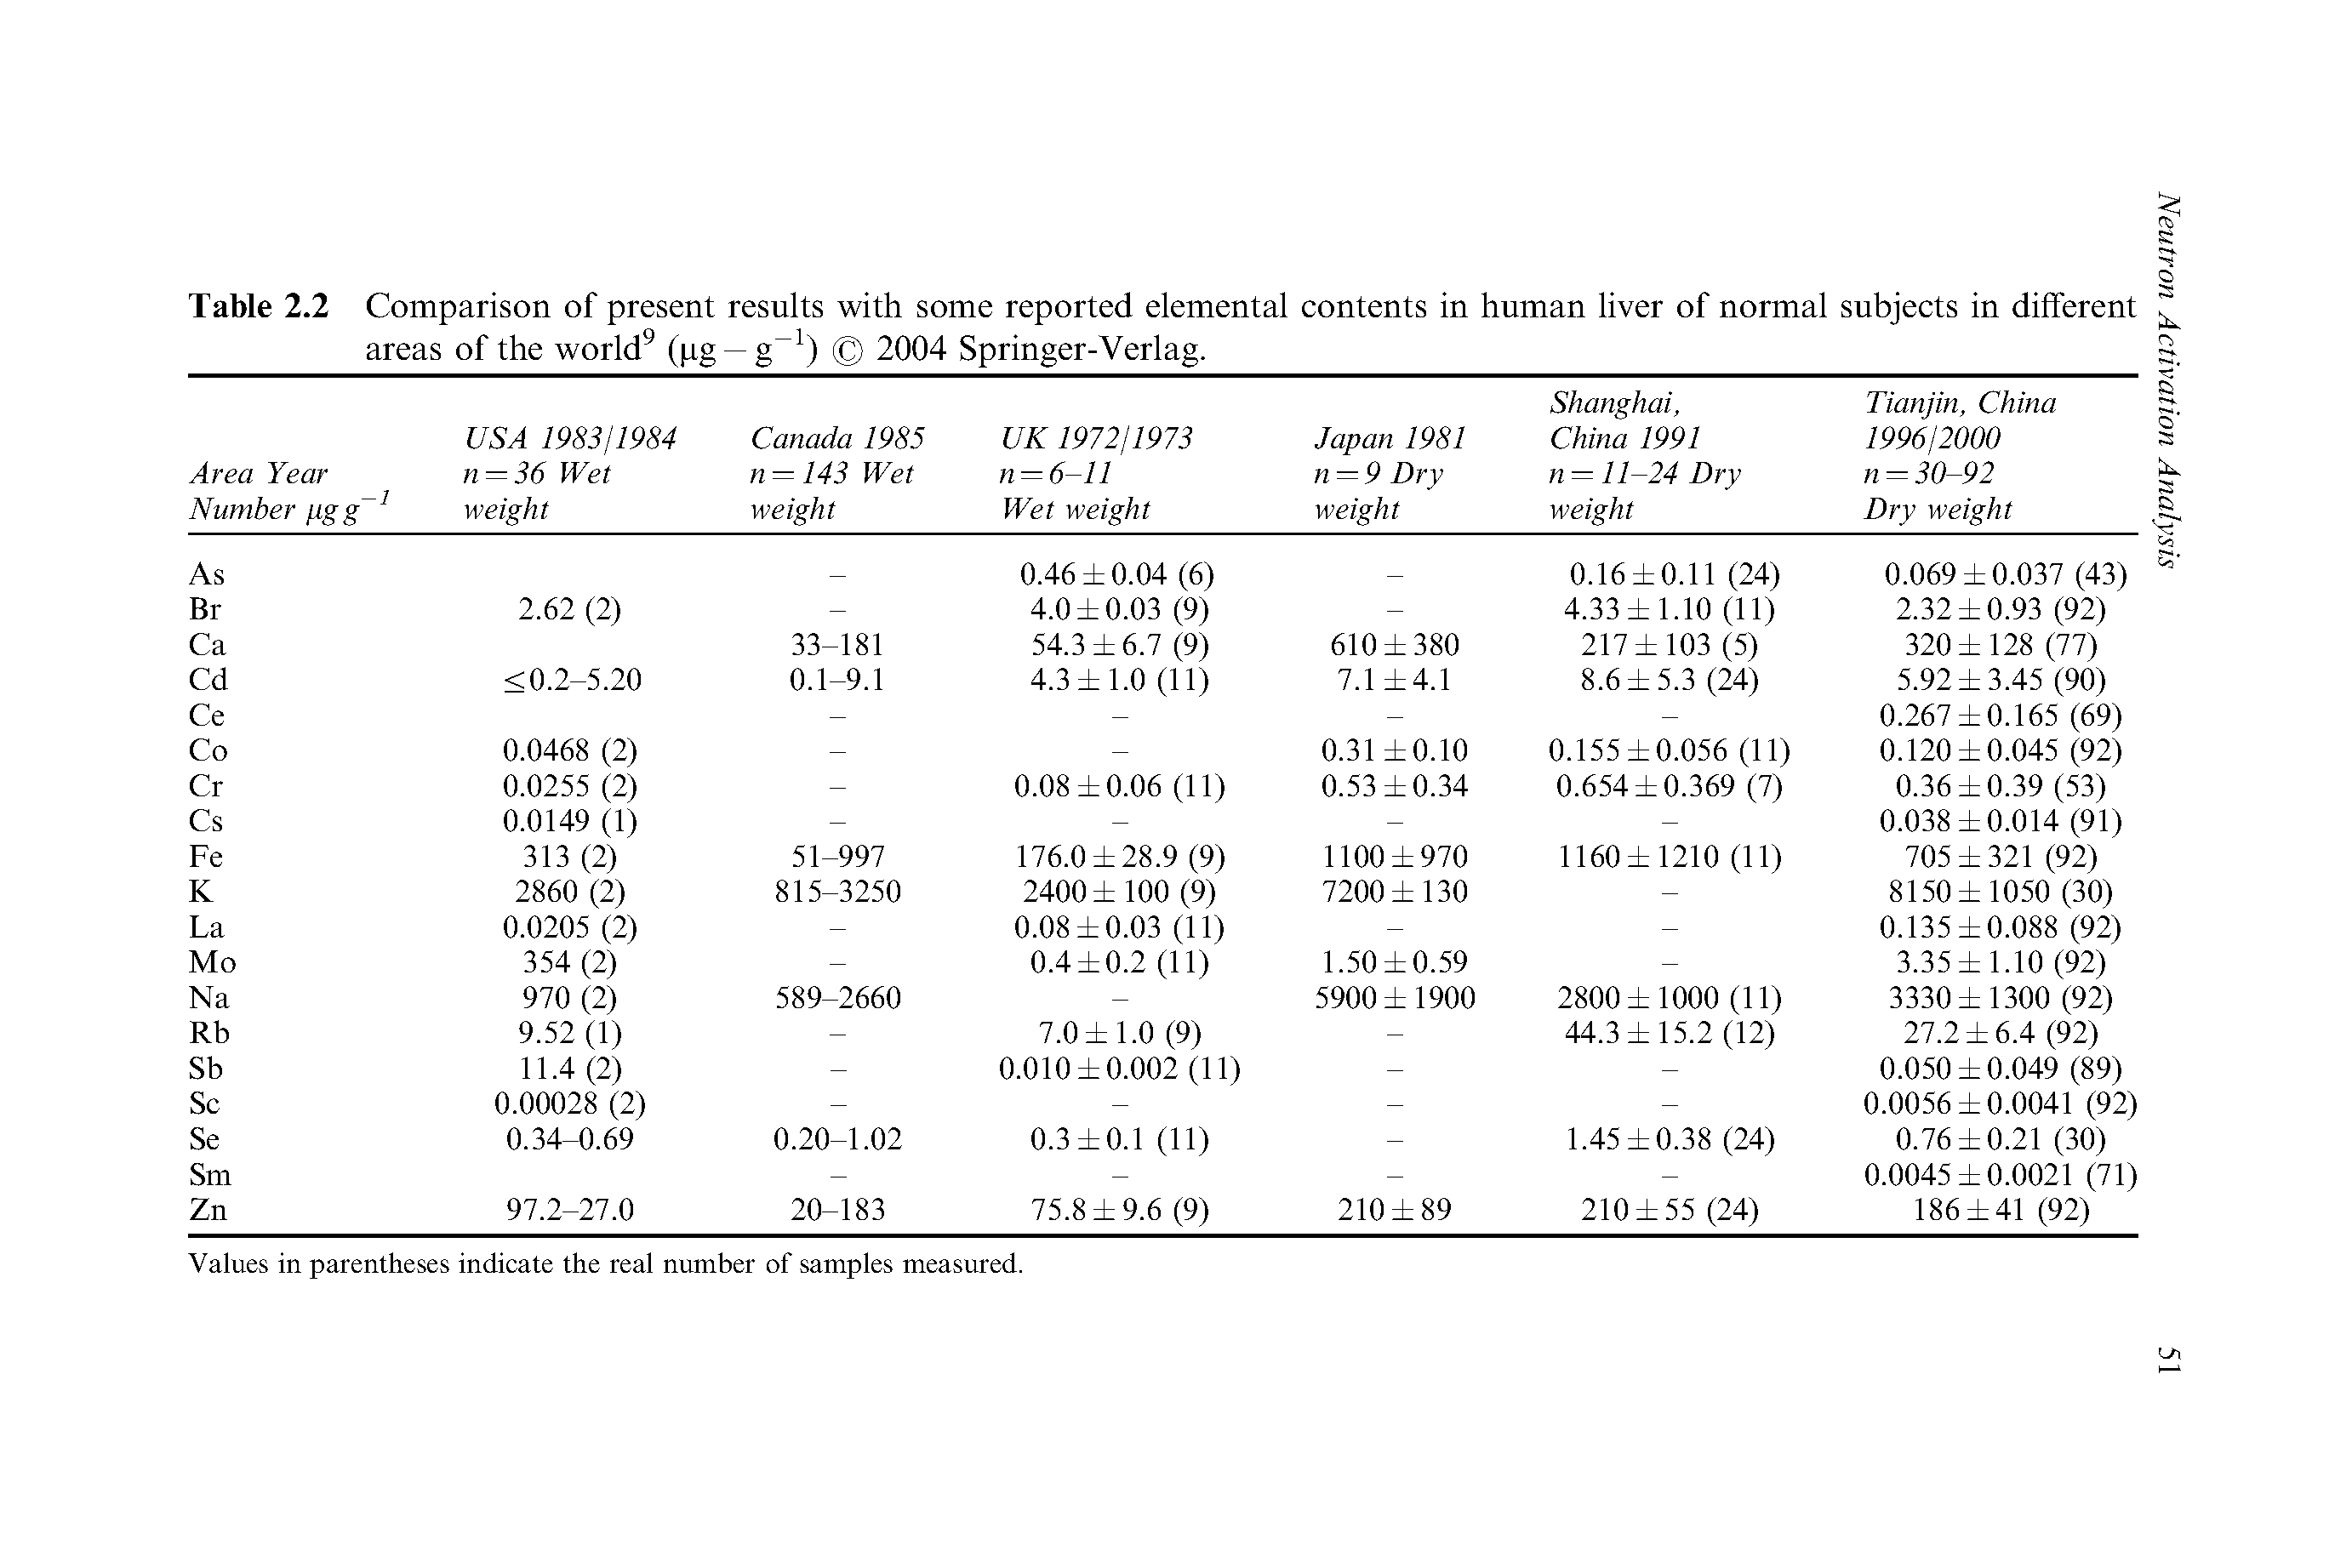 Table 2.2 Comparison of present results with some reported elemental contents in human liver of normal subjects in different areas of the world (pg —g ) 2004 Springer-Verlag.